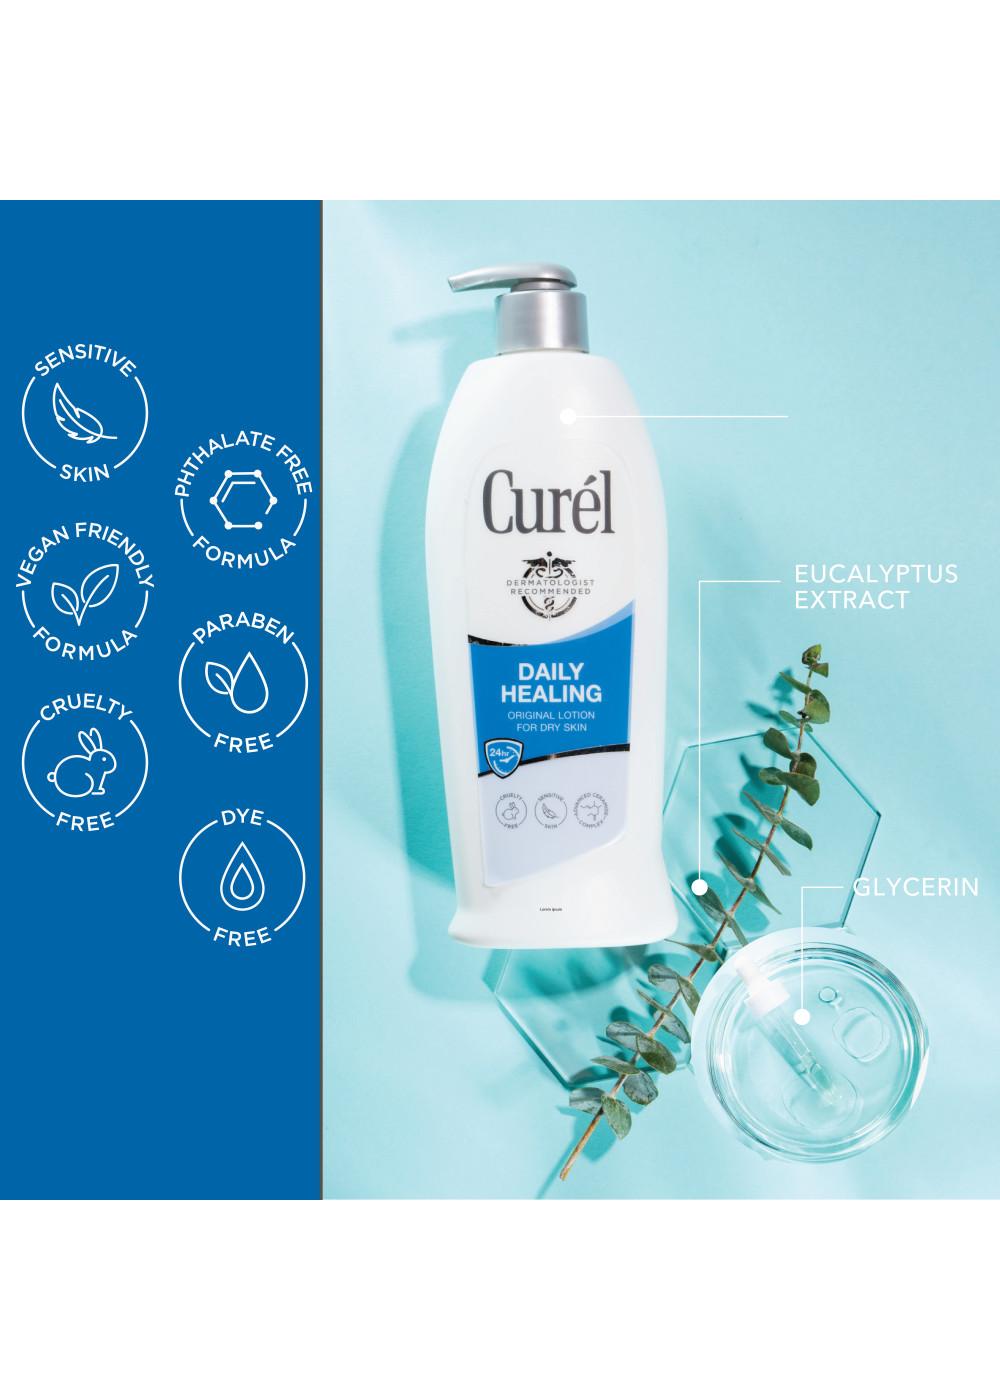 Curel Daily Healing Body Lotion; image 2 of 10